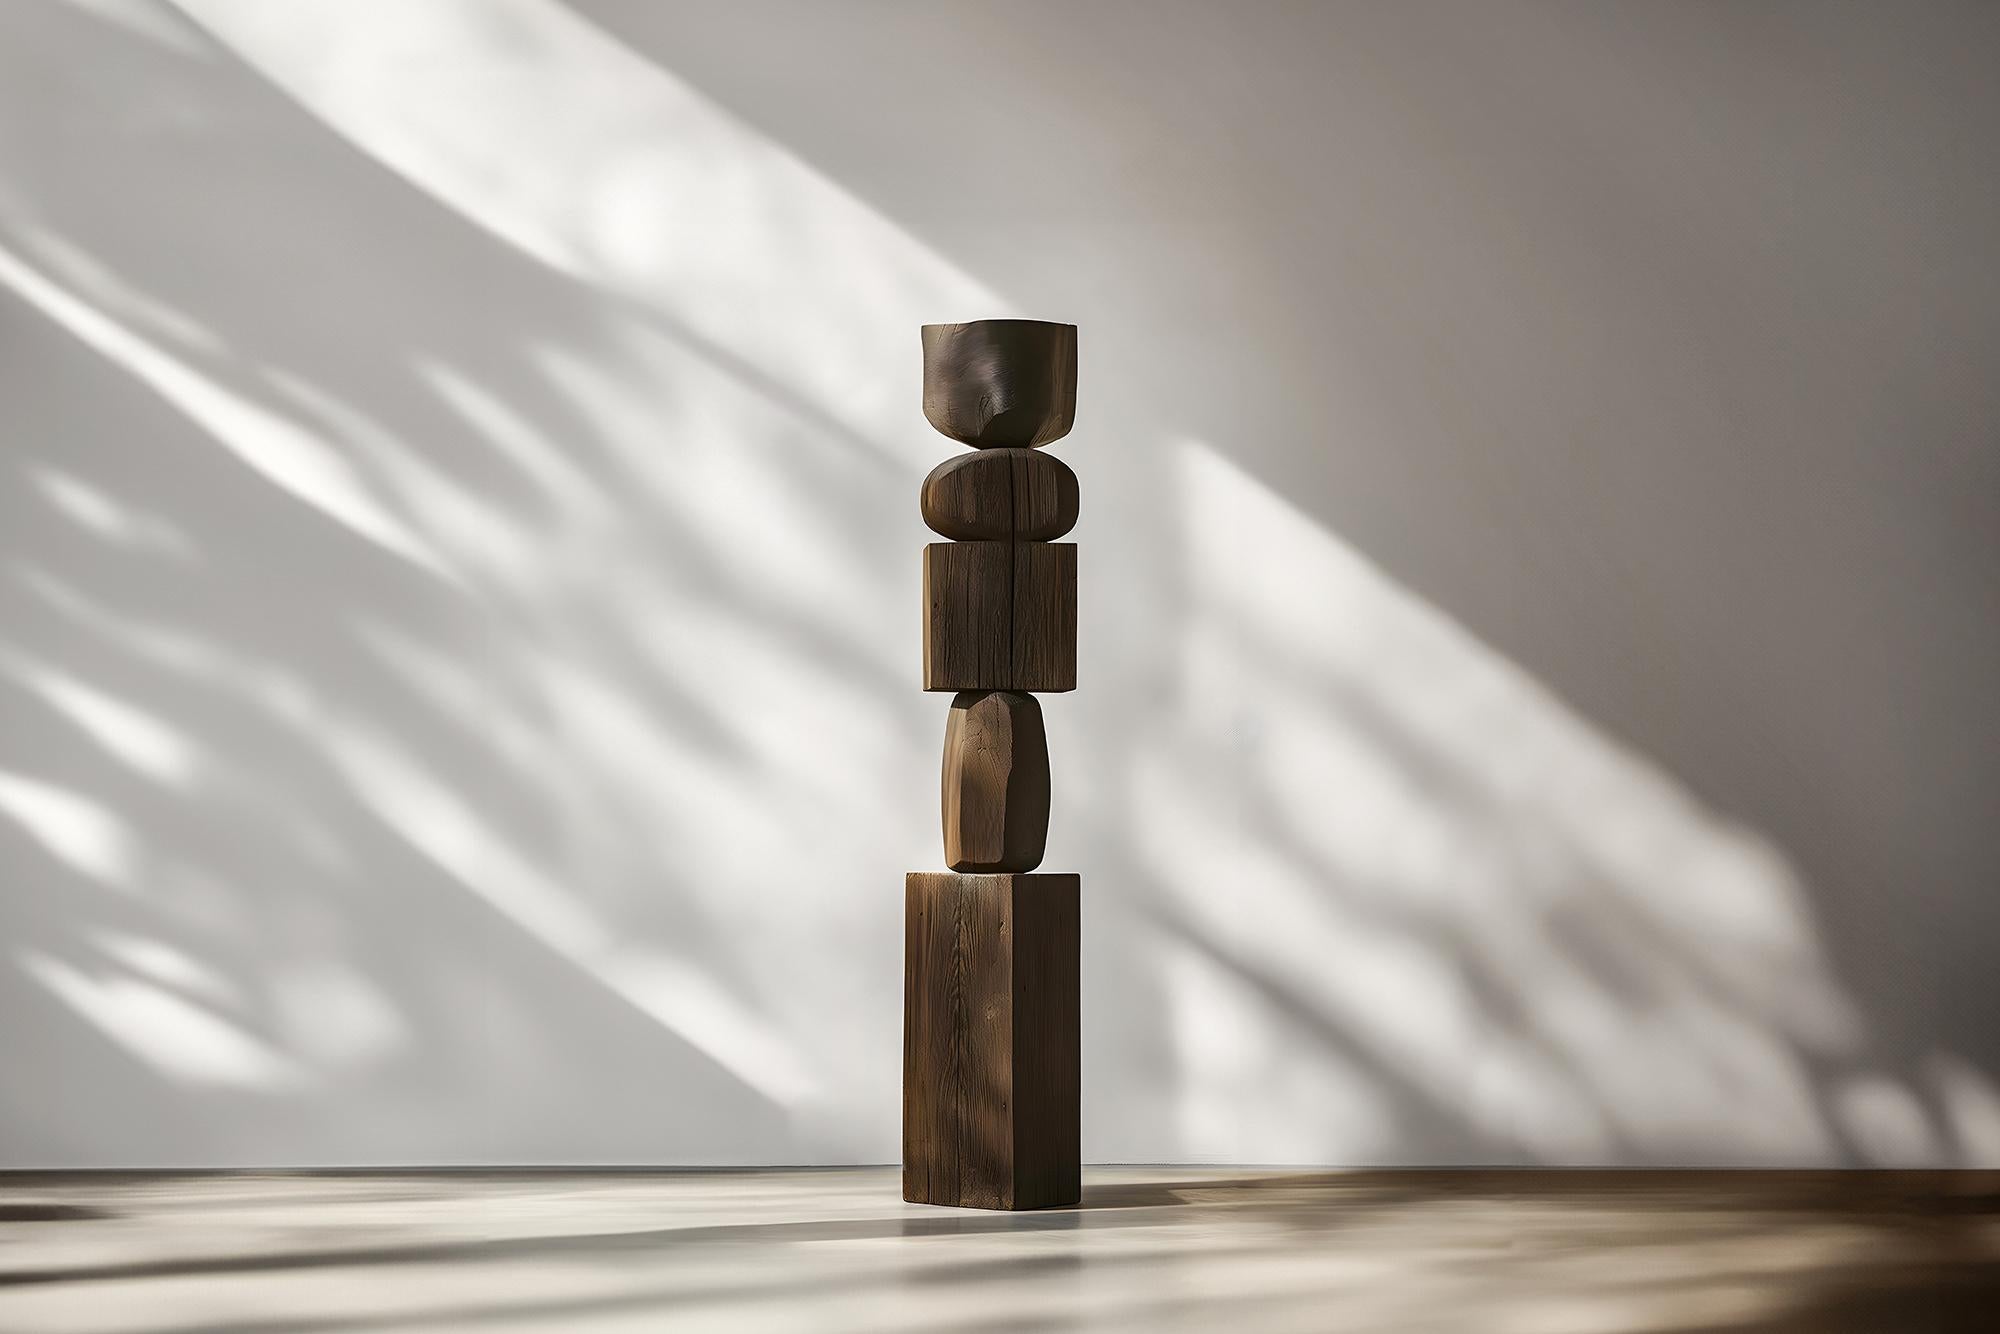 Burned Oak Sculpture, Abstract Elegance by Escalona, Captured in Still Stand No85

——


Joel Escalona's wooden standing sculptures are objects of raw beauty and serene grace. Each one is a testament to the power of the material, with smooth curves